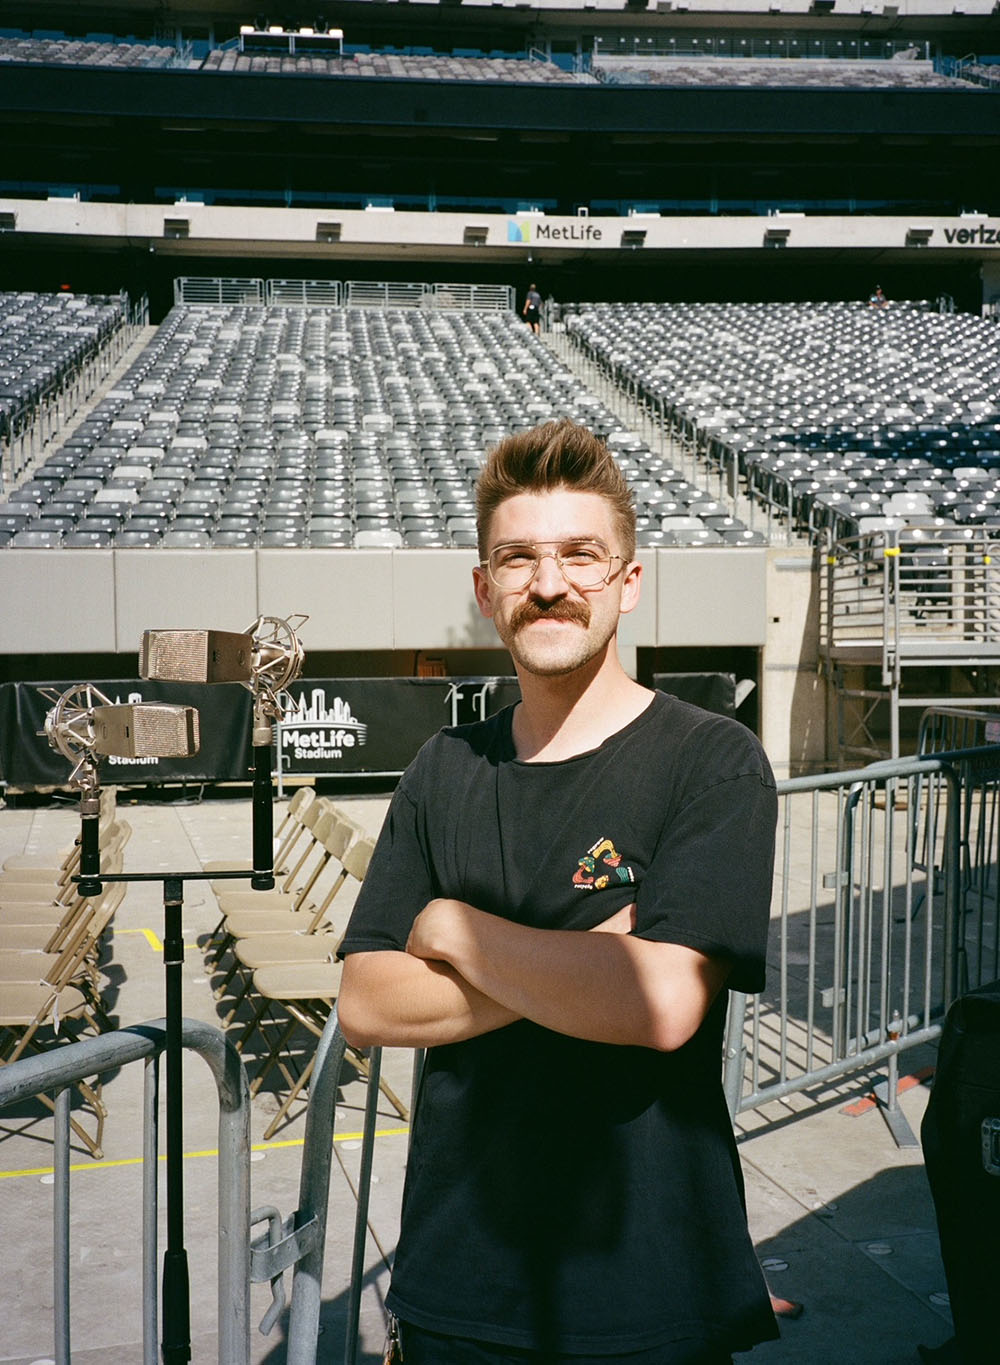 Tanner Kinney with P-414s at MetLife Stadium